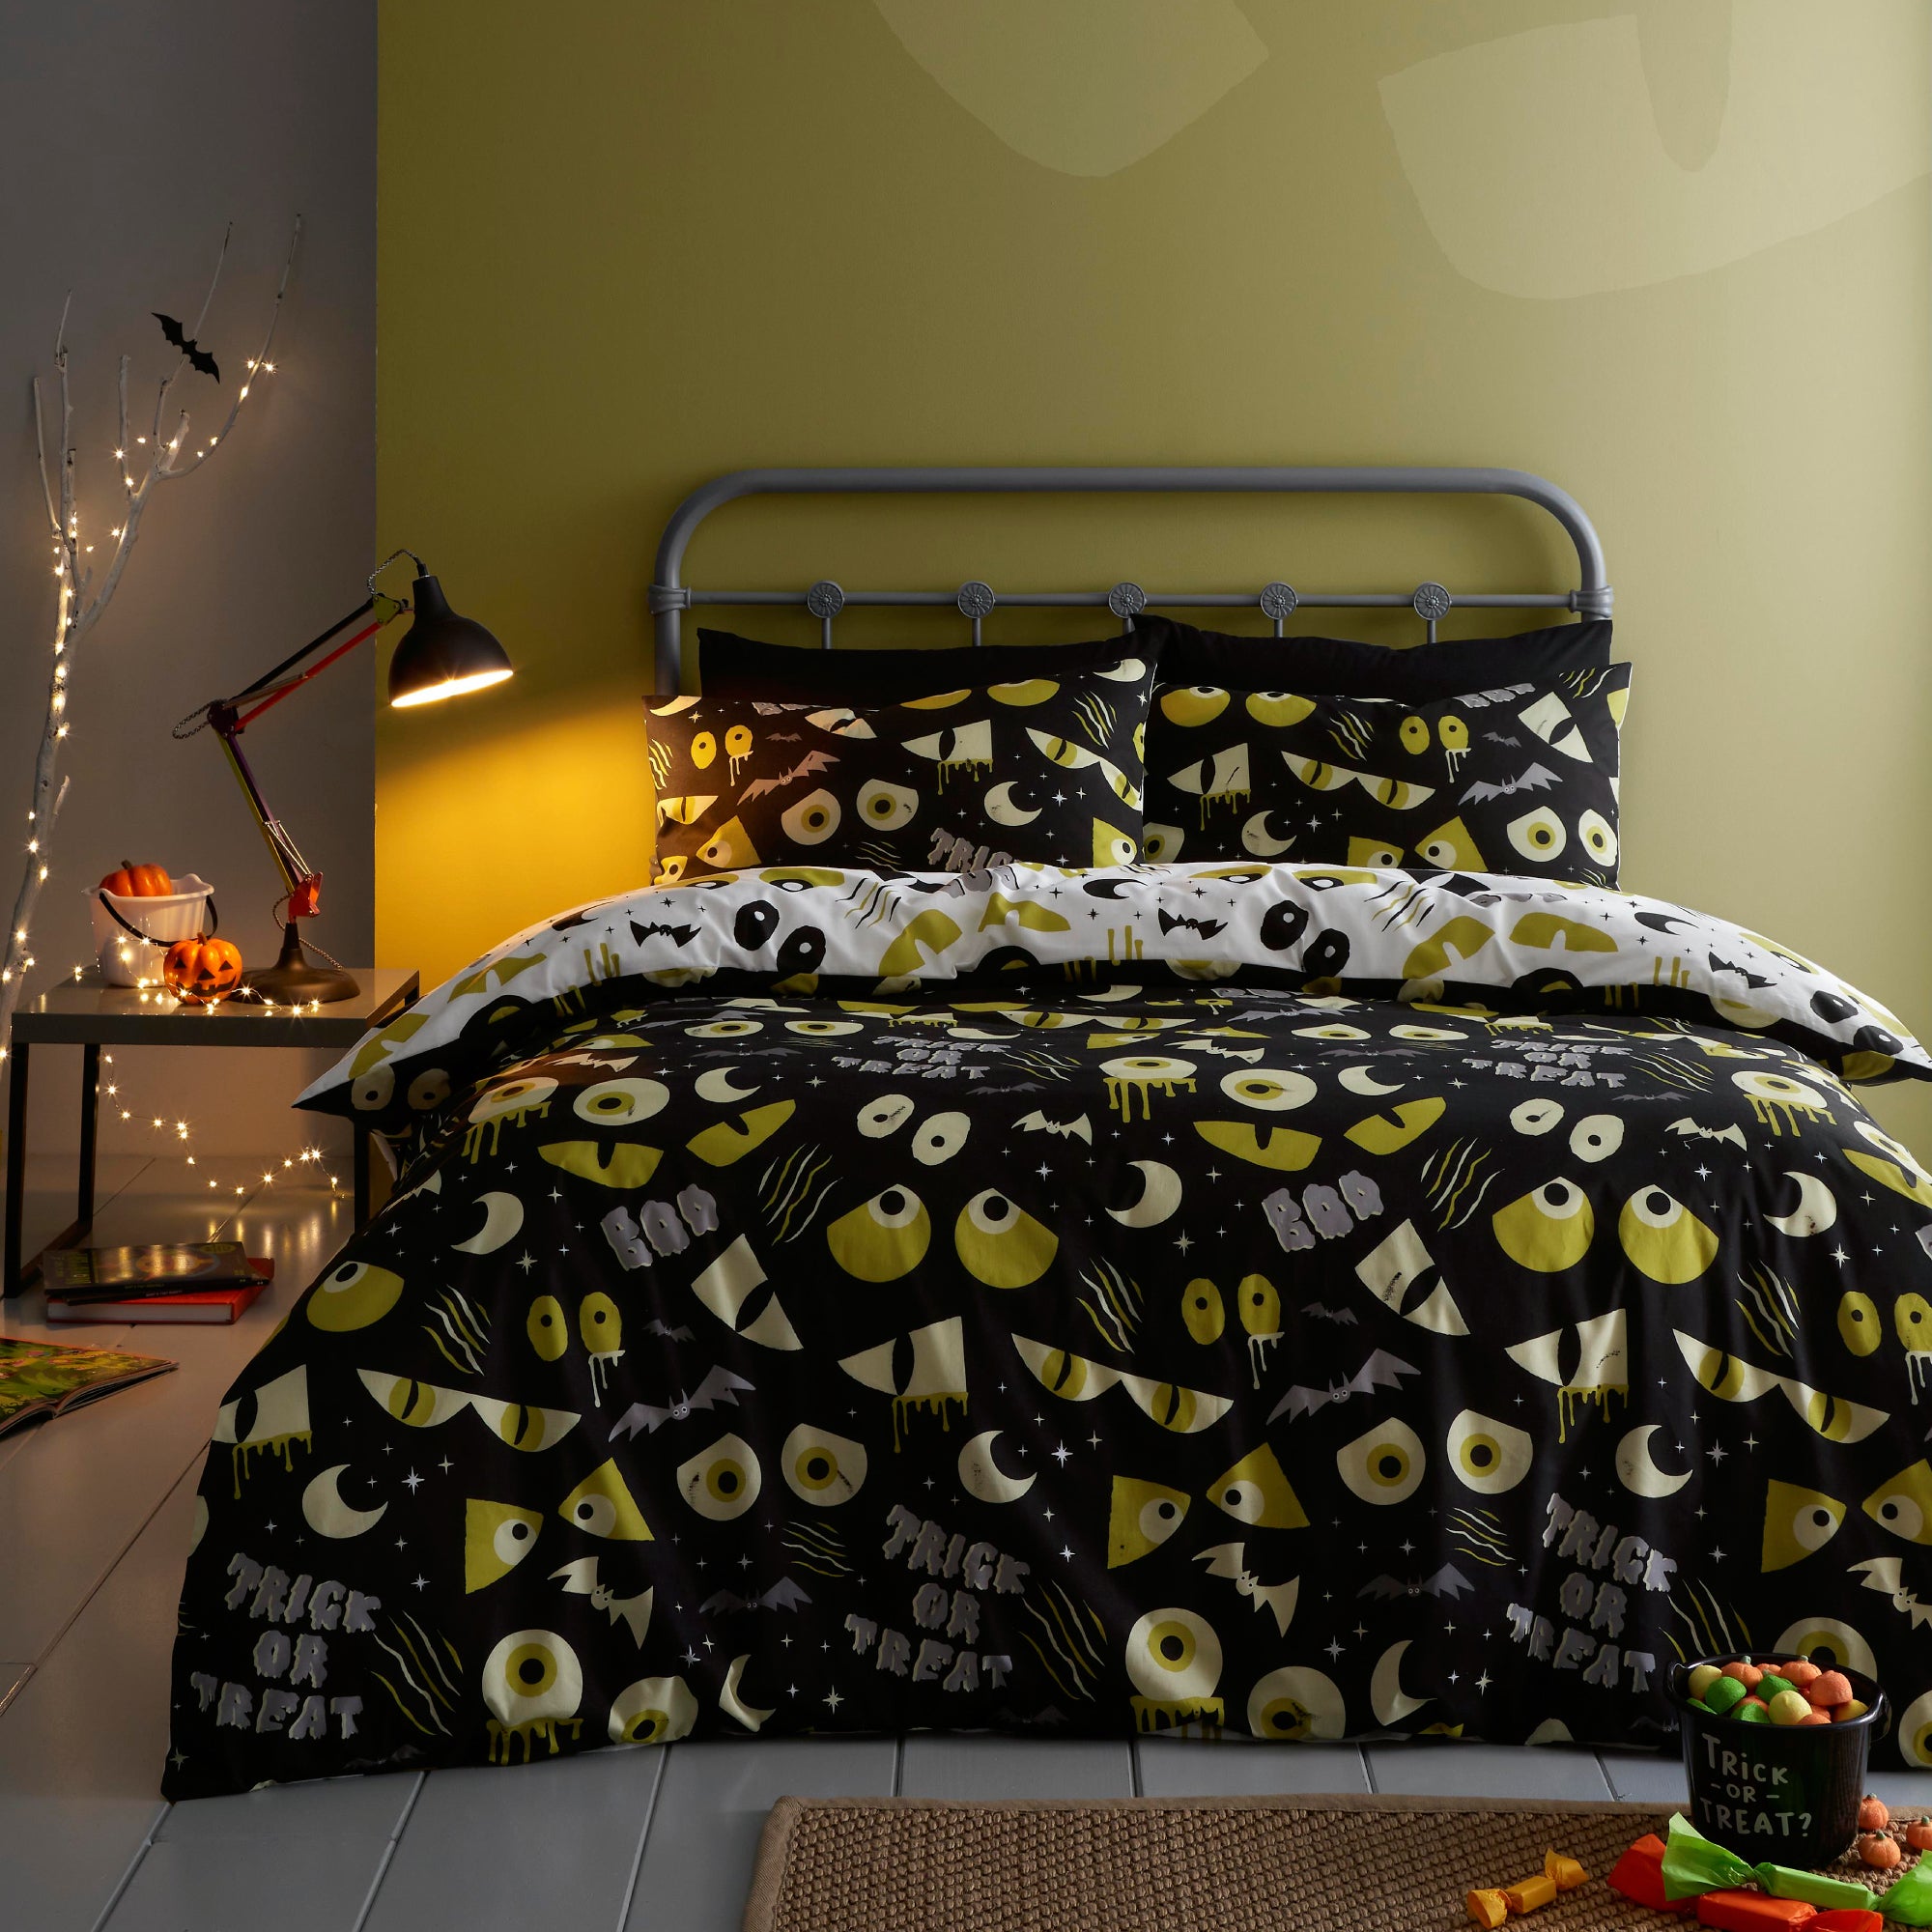 Duvet Cover Set Halloween Trick or Treat by Bedlam in Black